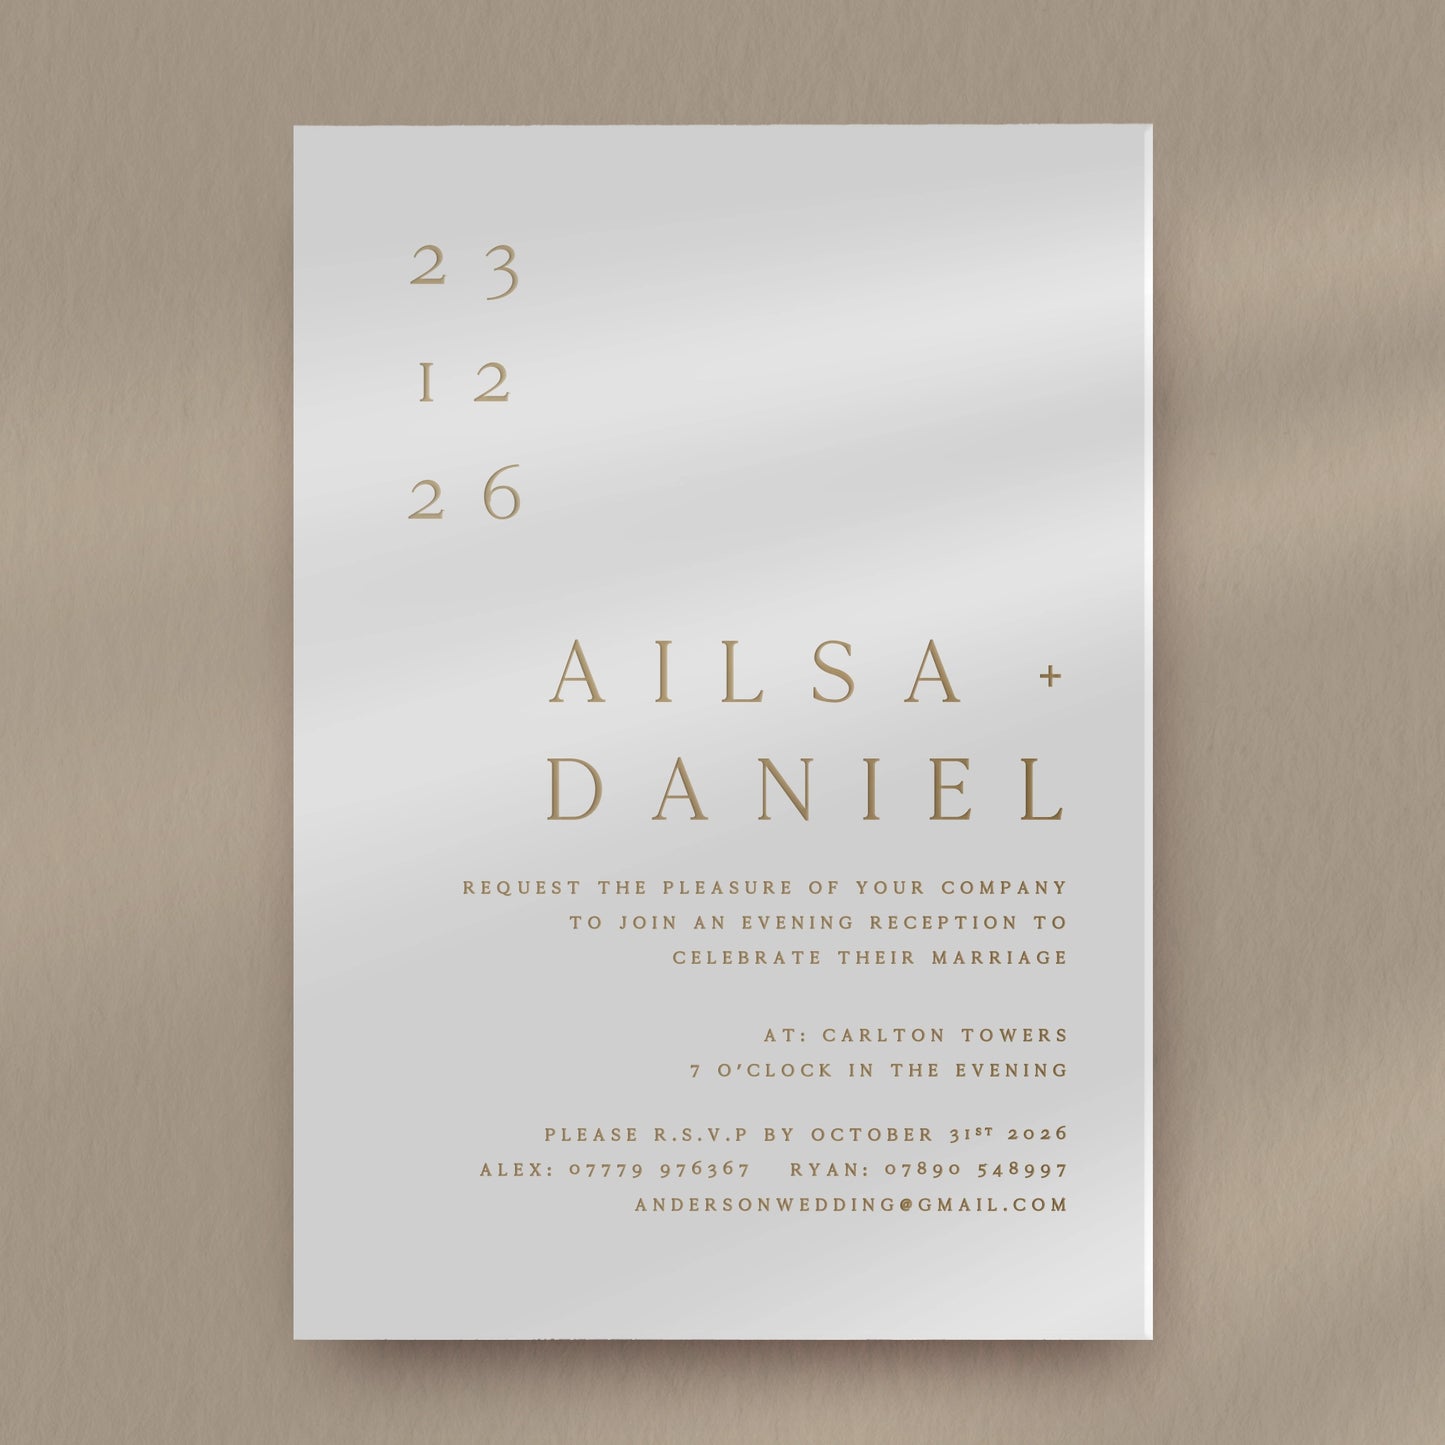 Evening Invitation Sample  Ivy and Gold Wedding Stationery Ailsa  